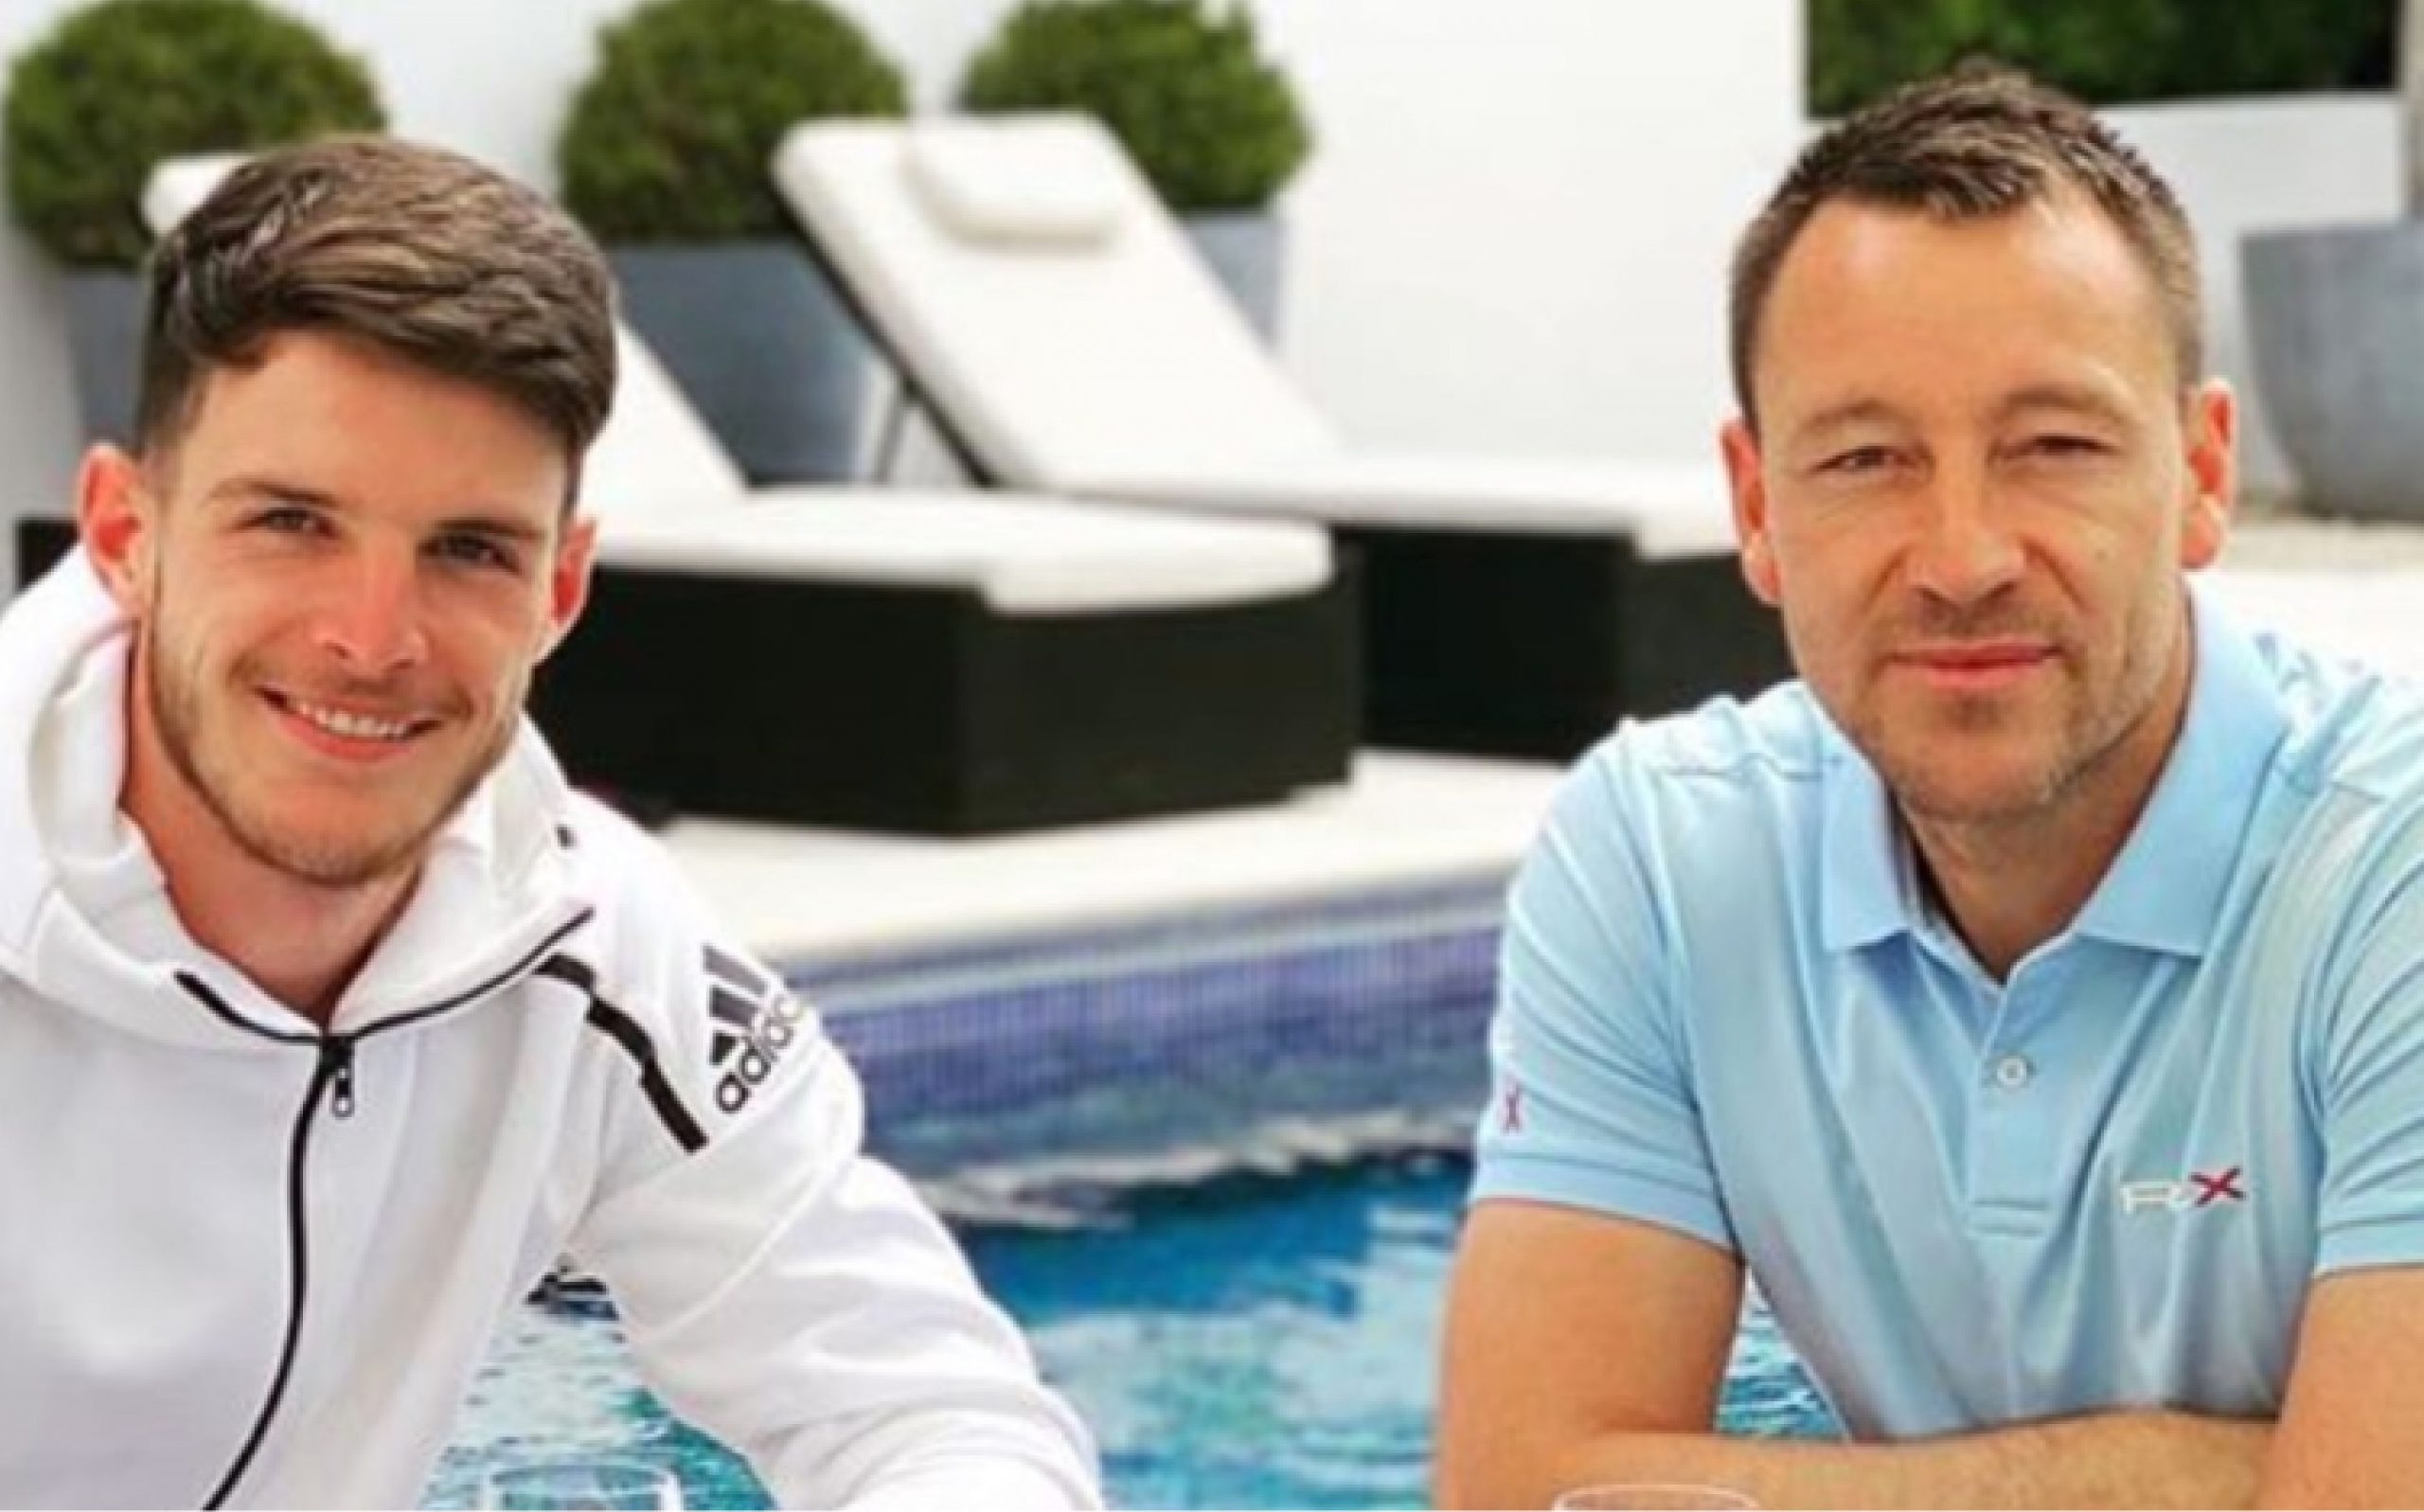 Declan Rice and John Terry hanging out together